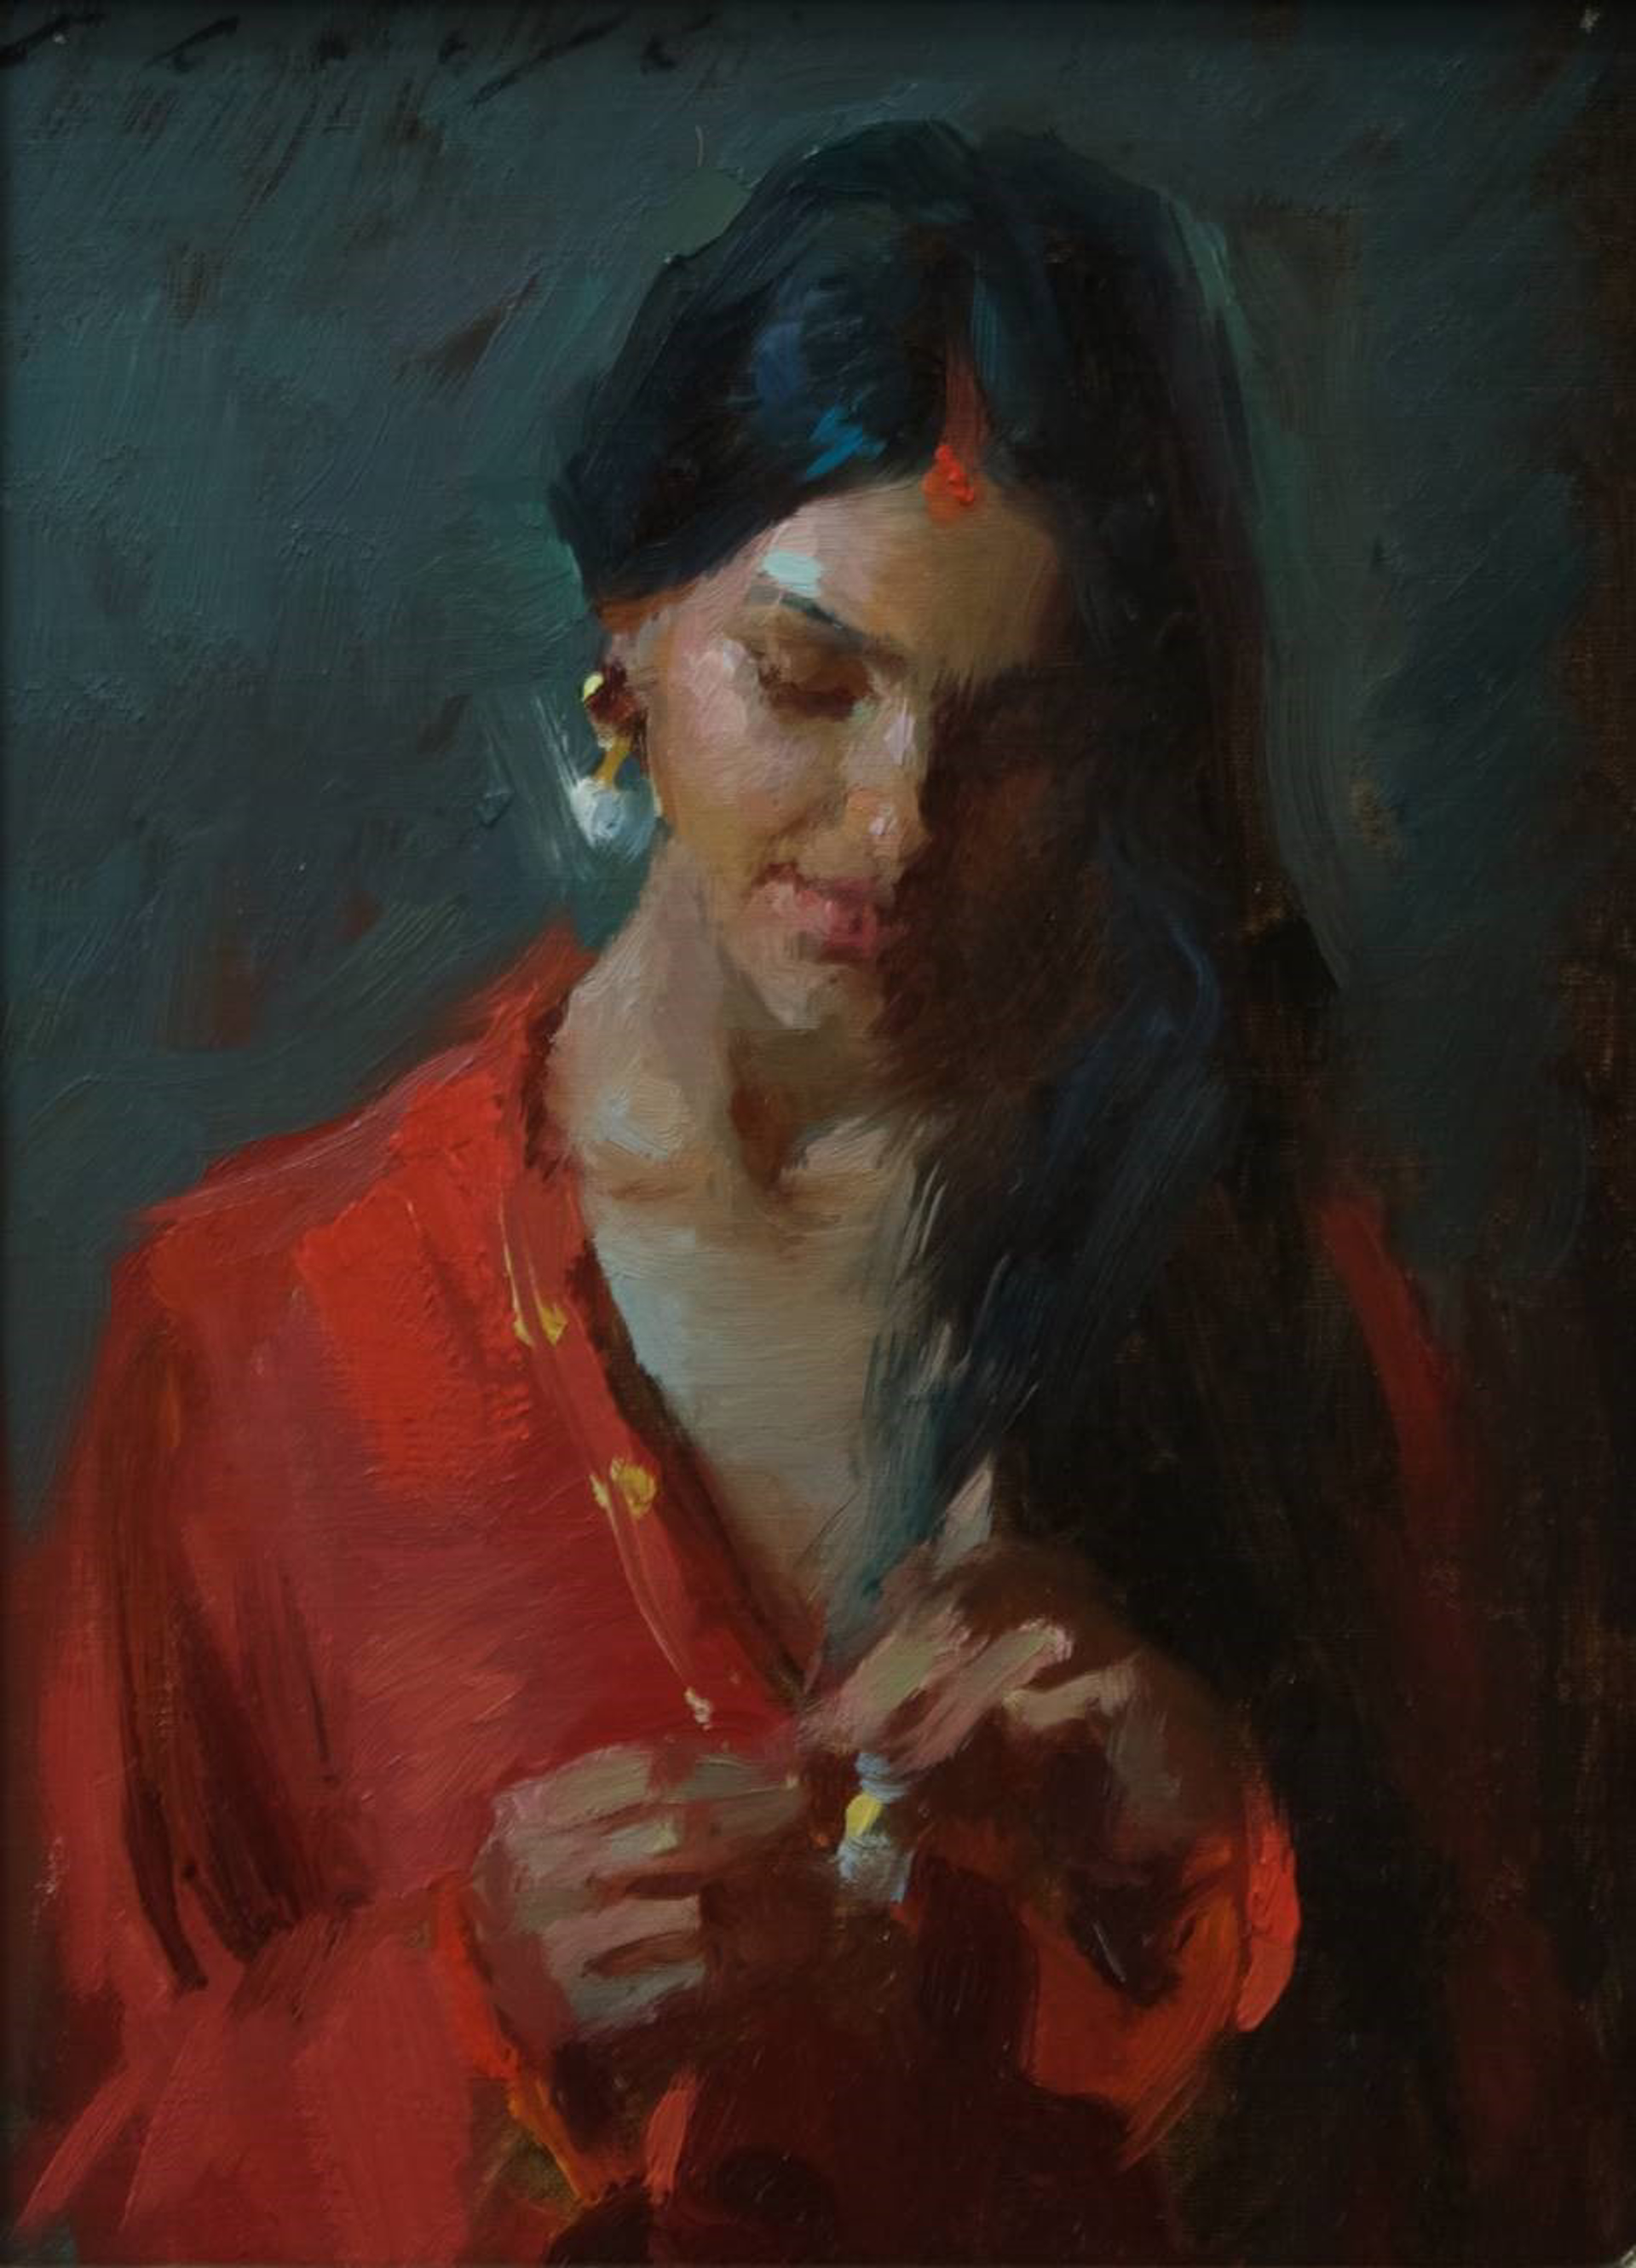 Vermillion Indian Beauty by Suchitra Bhosle